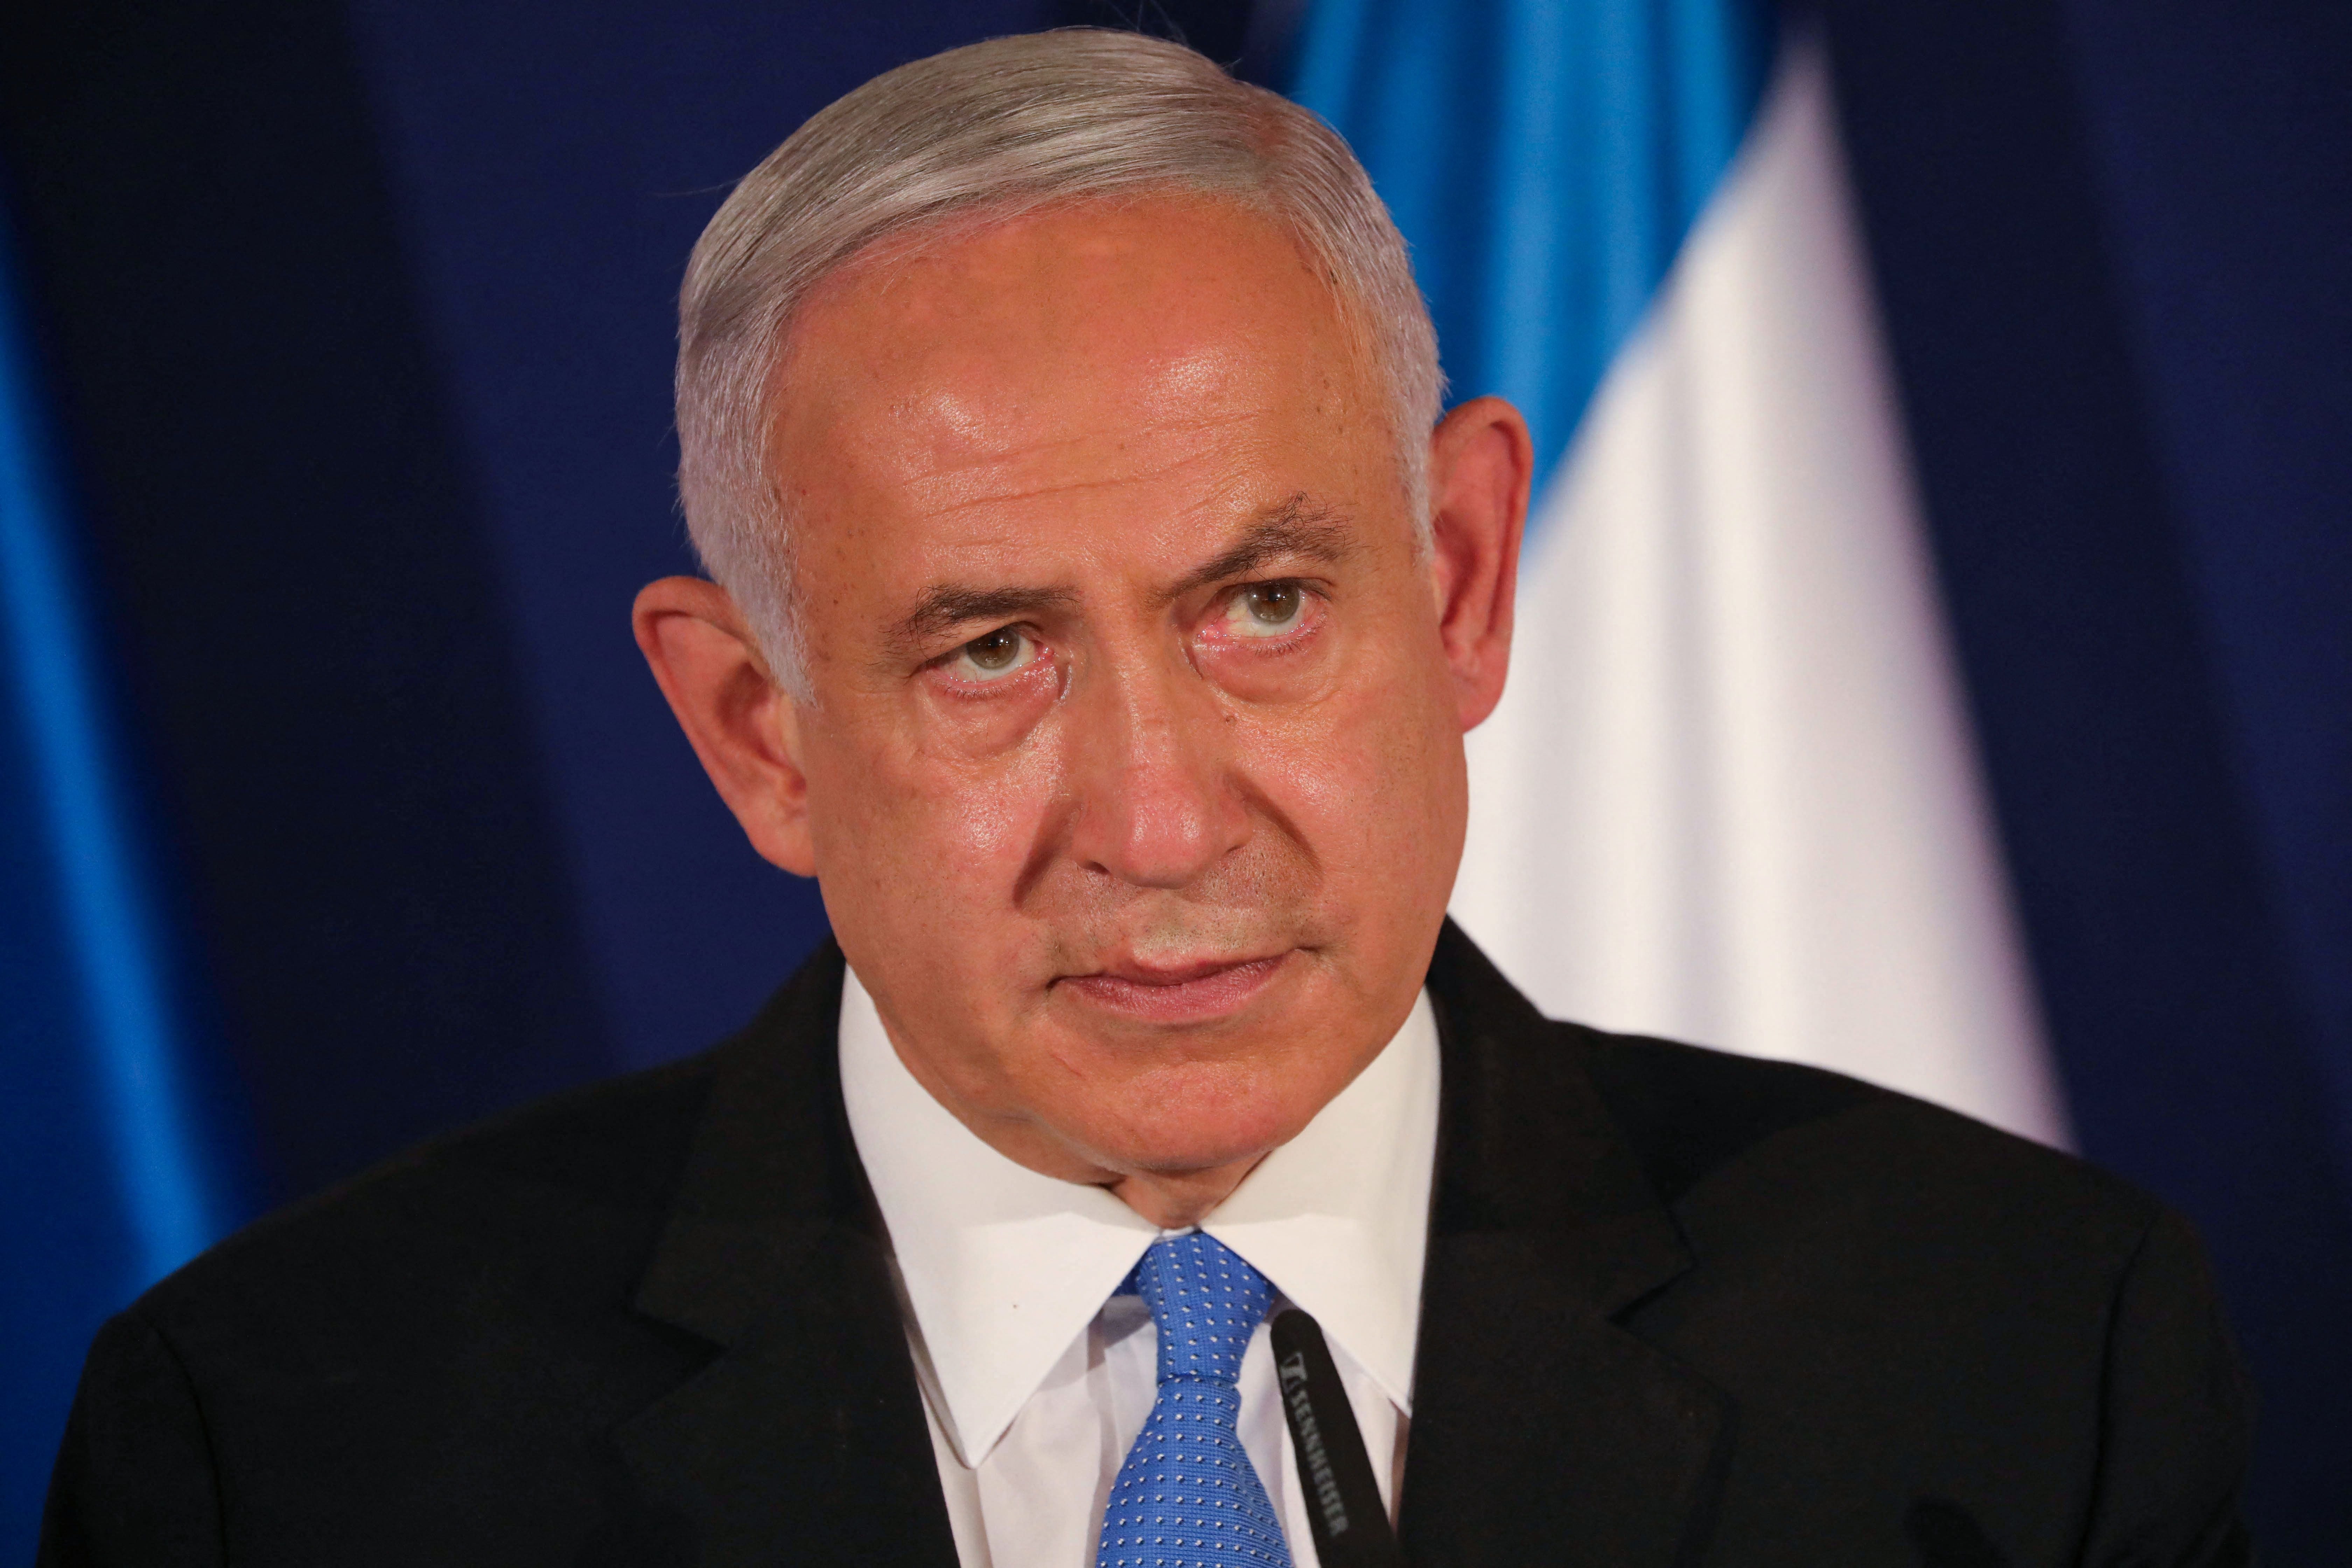 ‘Netanyahu had only a very tight window of time as he had to be back here to meet Hungarian and Czech leaders this evening,’ said an Israel-based commentator